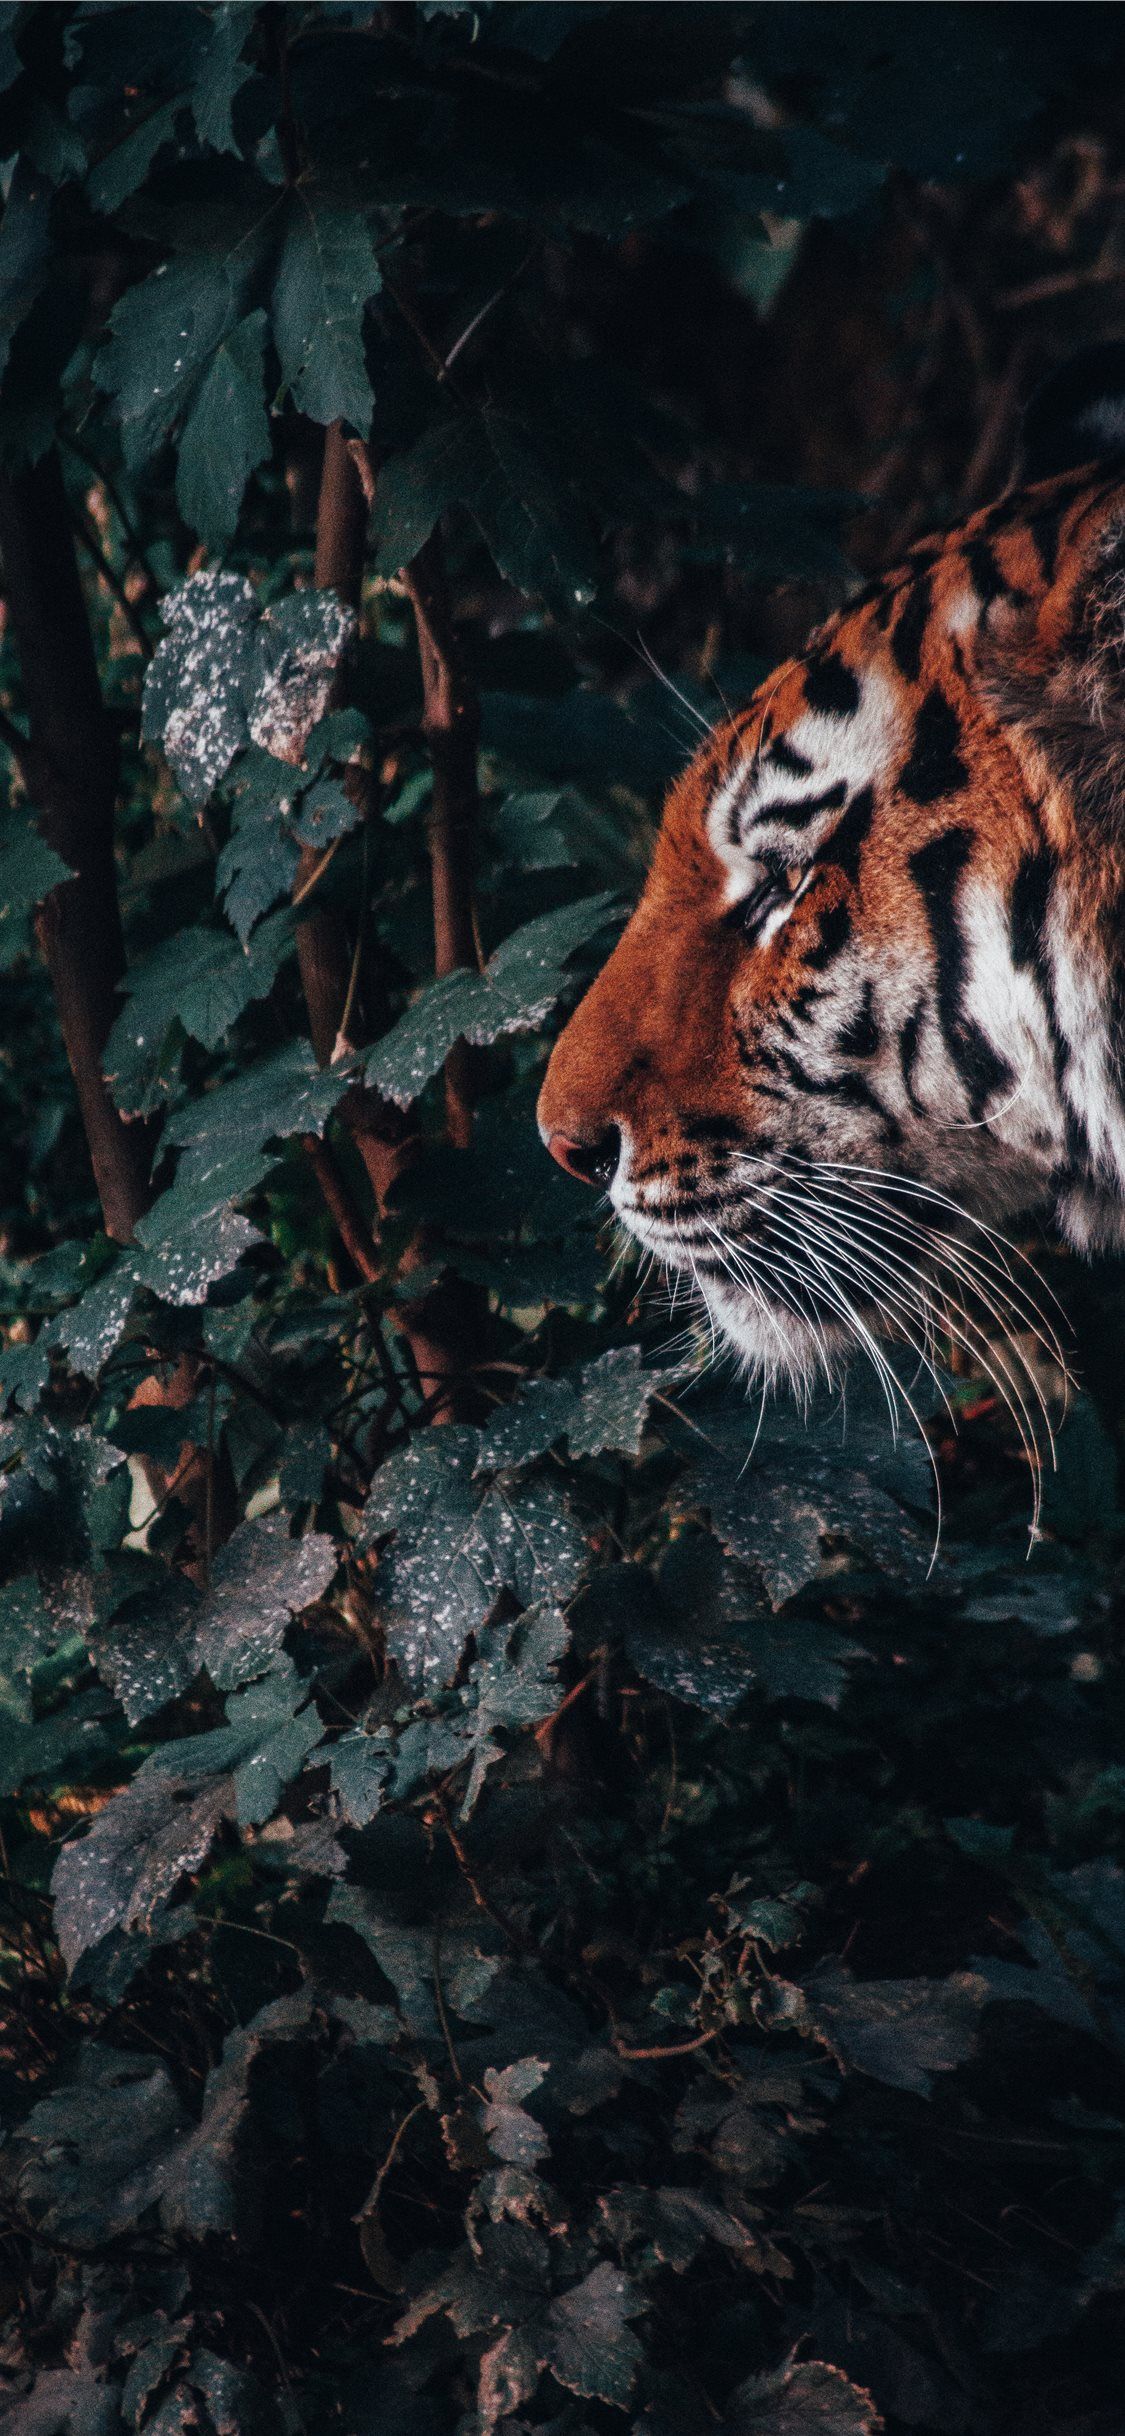 The beast in the jungle #NurembergZoo #Nürnberg #germany #jungle #forest #fur #Portrait #iPhone11Wallpaper. Animal photography, Animal wallpaper, Tiger picture